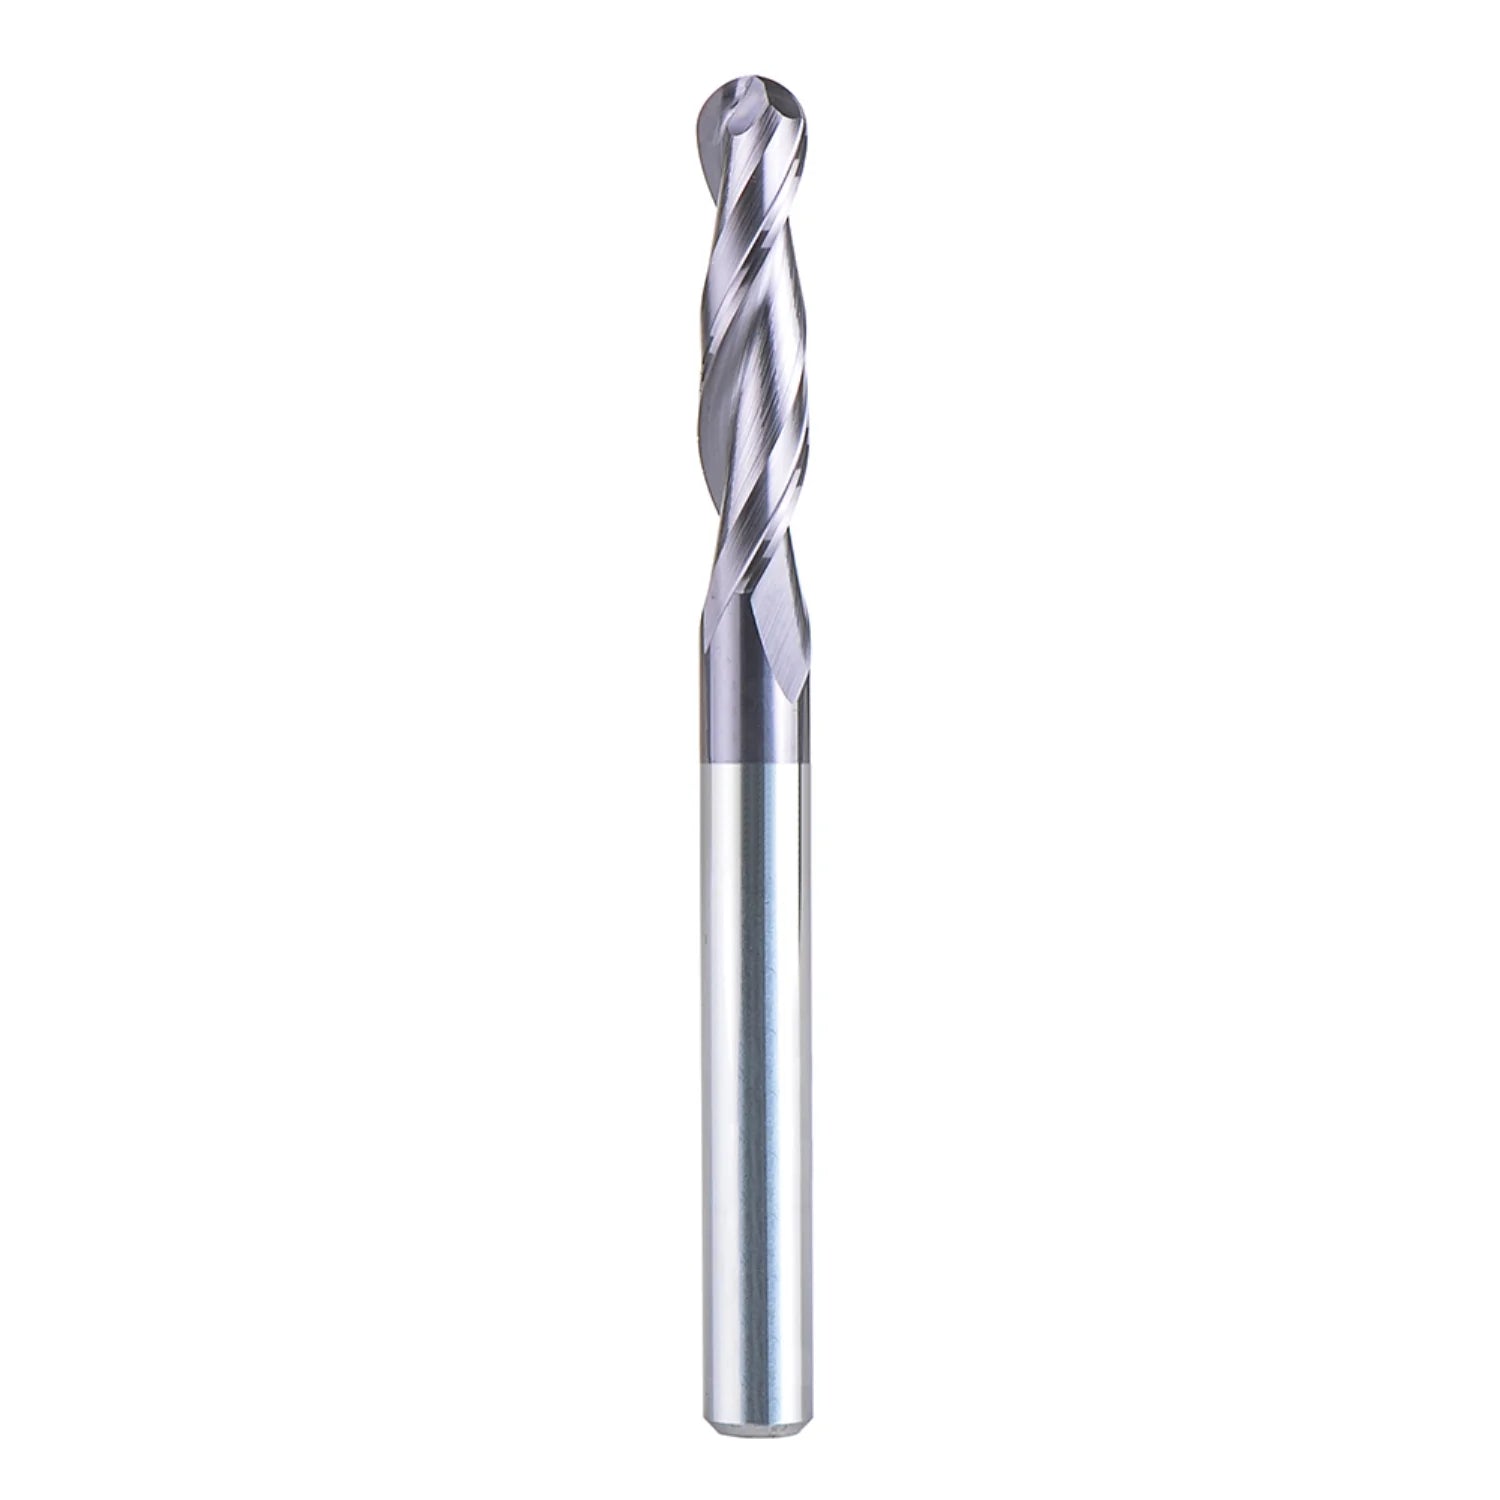 SpeTool 2 Flute 1/4" Shank Ball Nose End Mill 3" Long Router Bits For Metal